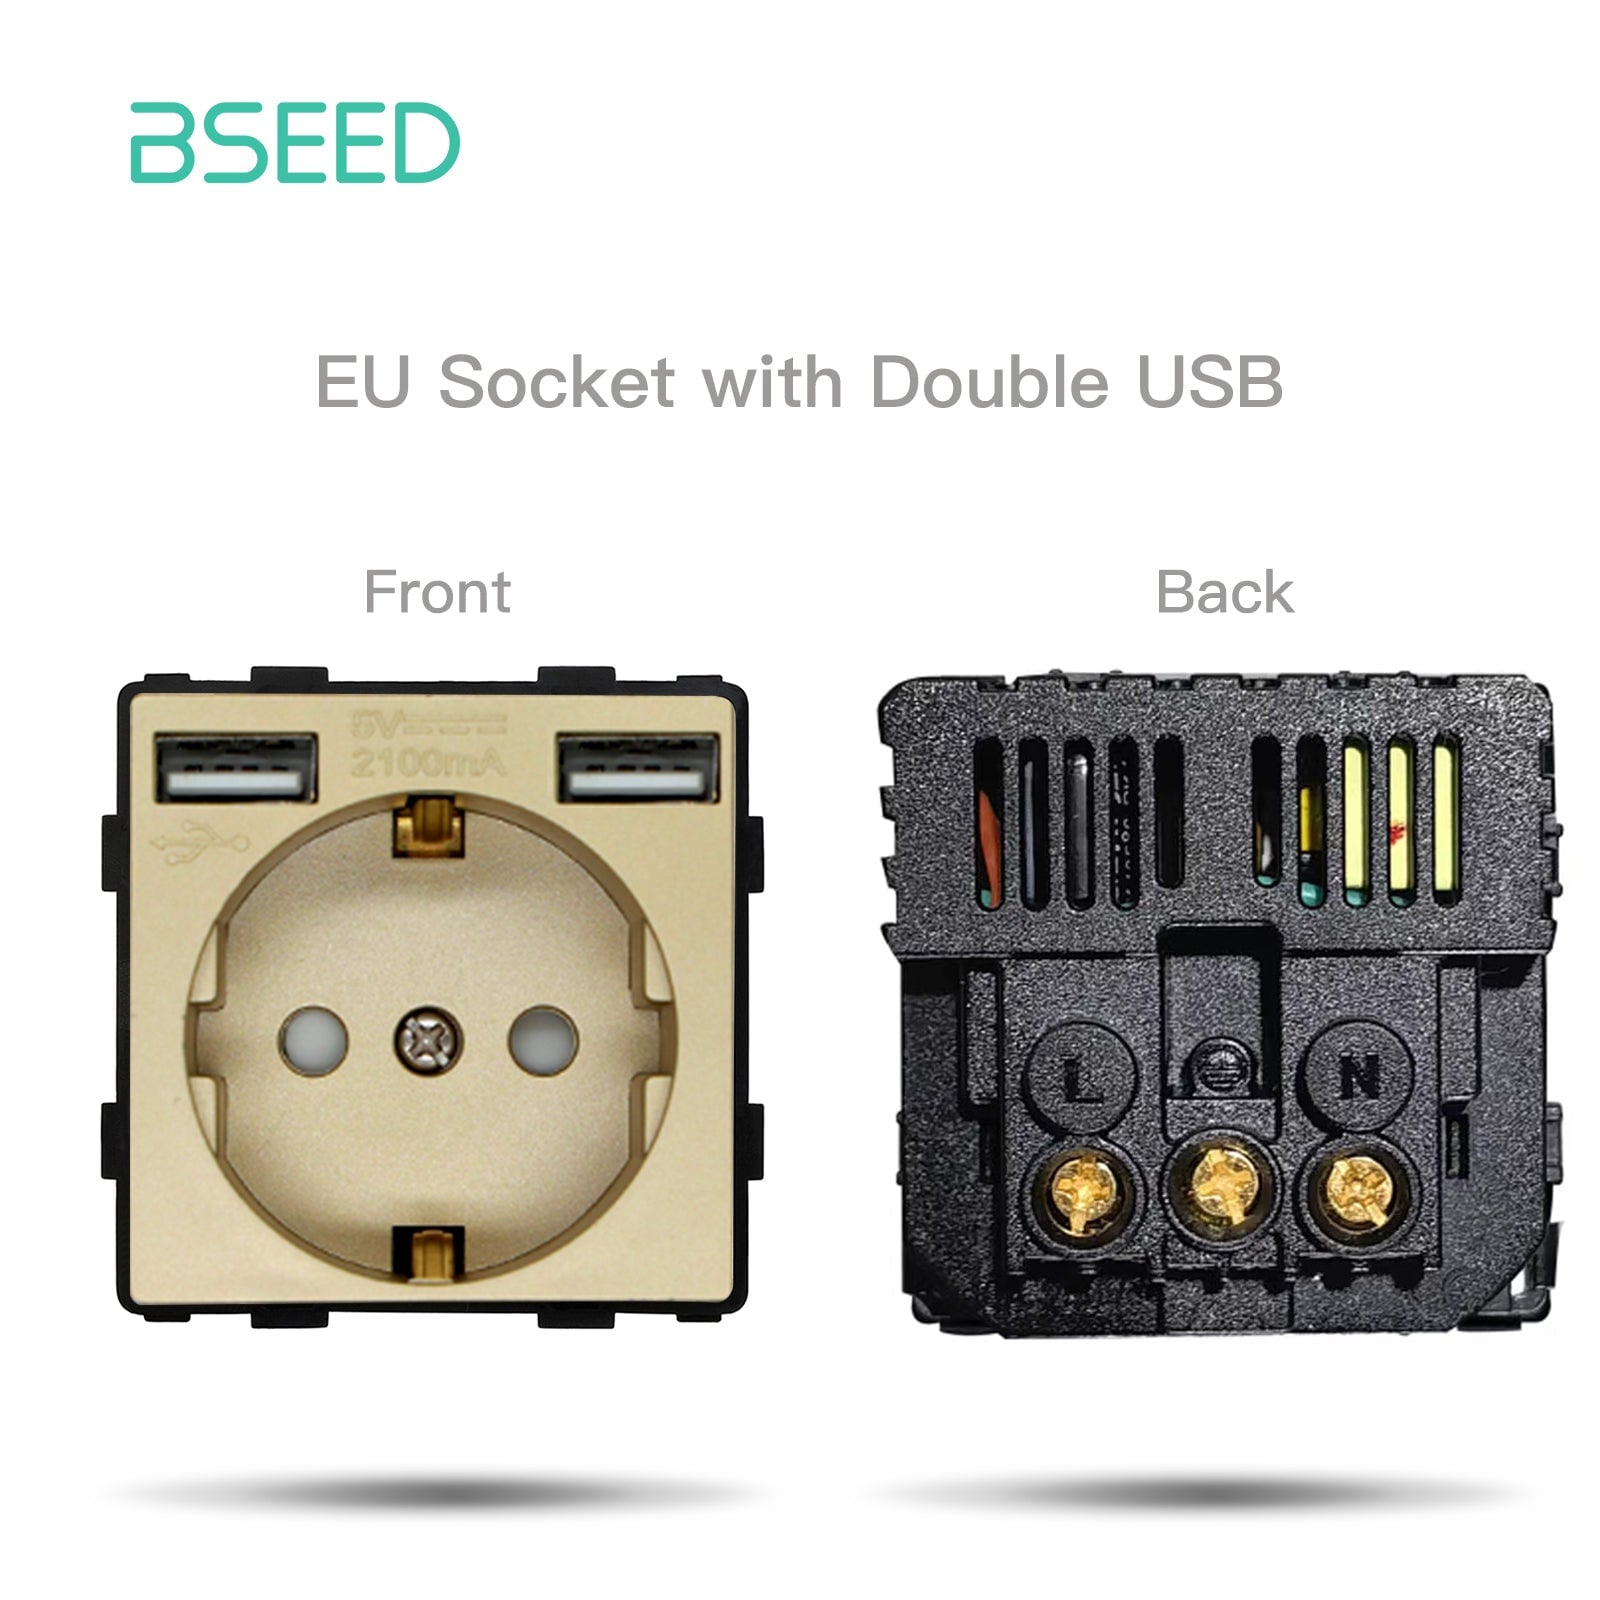 BSEED EU standard Function Key Cover Socket With Double USB socket DIY Parts Power Outlets & Sockets Bseedswitch GOLDEN 